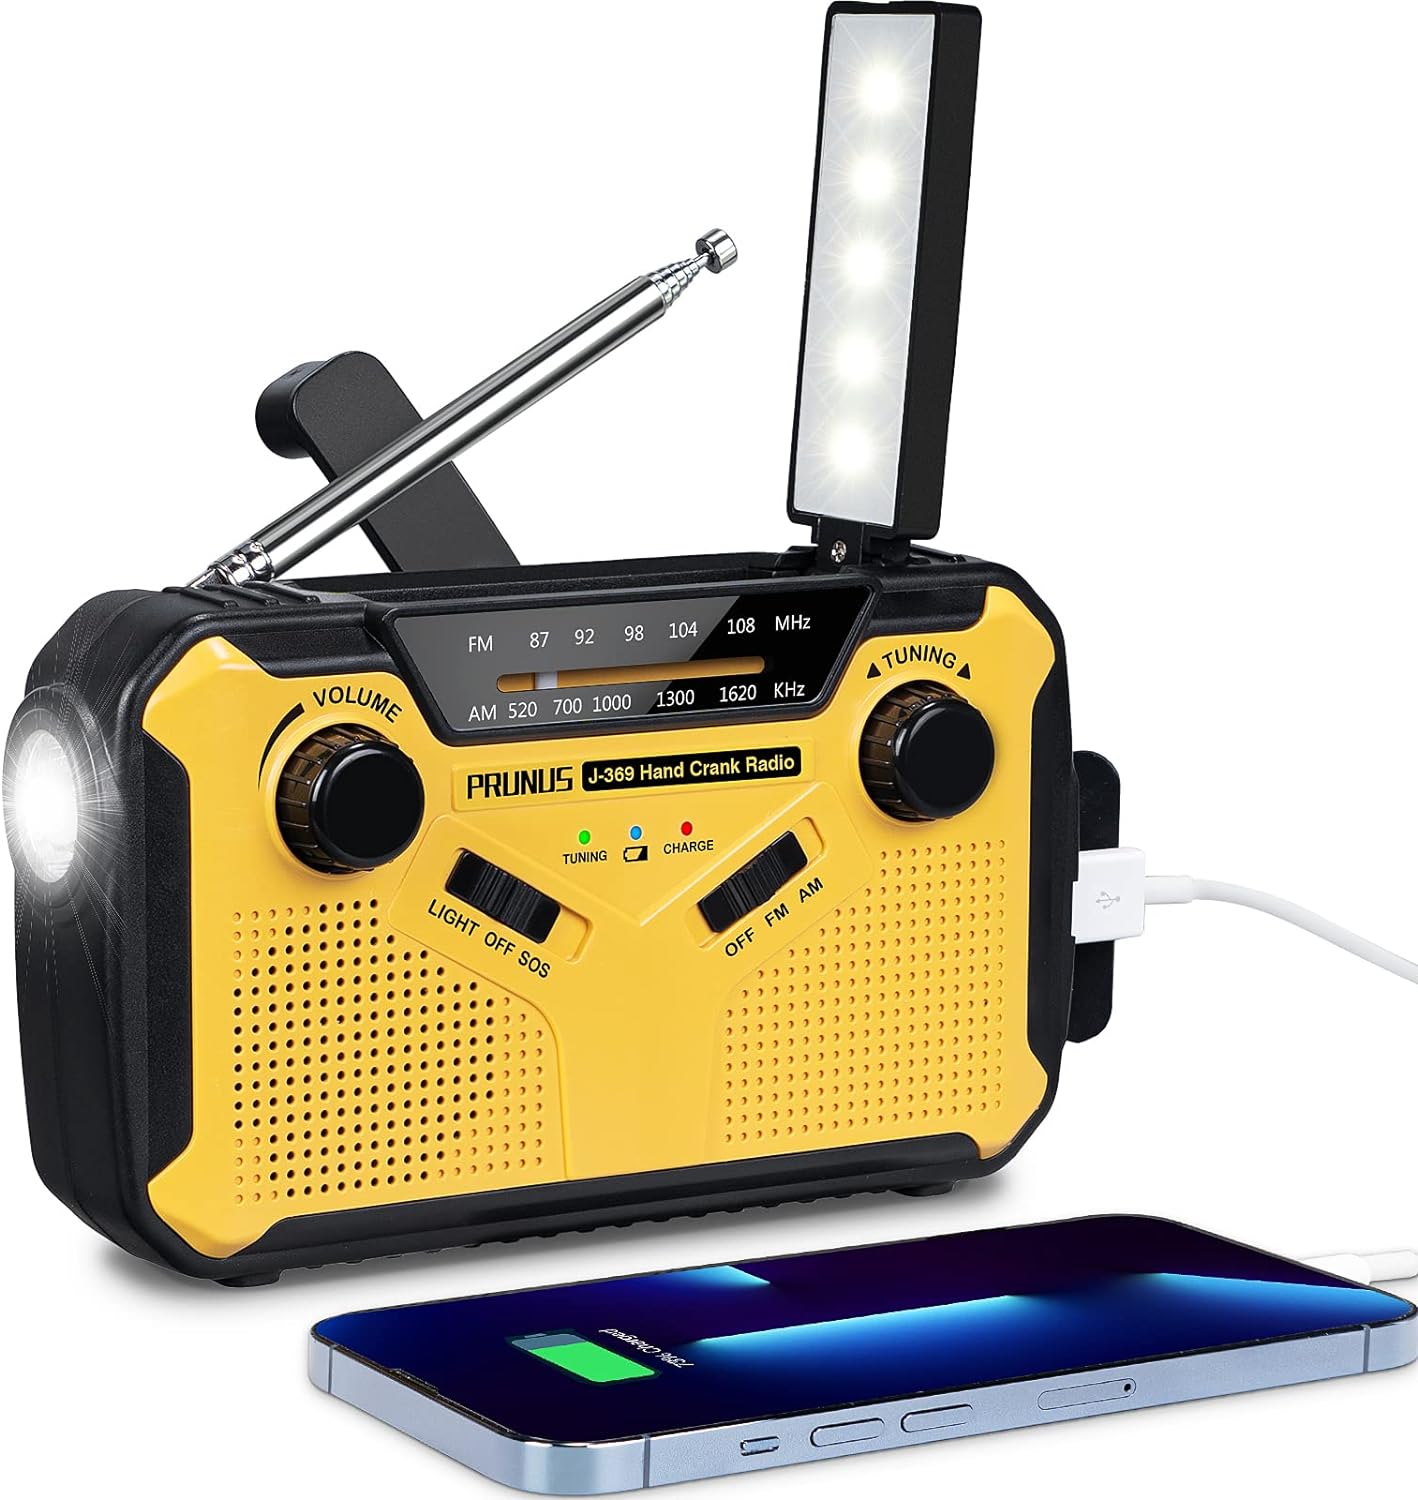 PRUNUS J-369 Wind Up Radio, Survival Equipment, AM/FM Portable Radio, Battery Radio with 3000mAh Power Bank, Solar Radio with Torch, Reading Lamp and SOS Alarm for Camping, Hiking and Emergencies